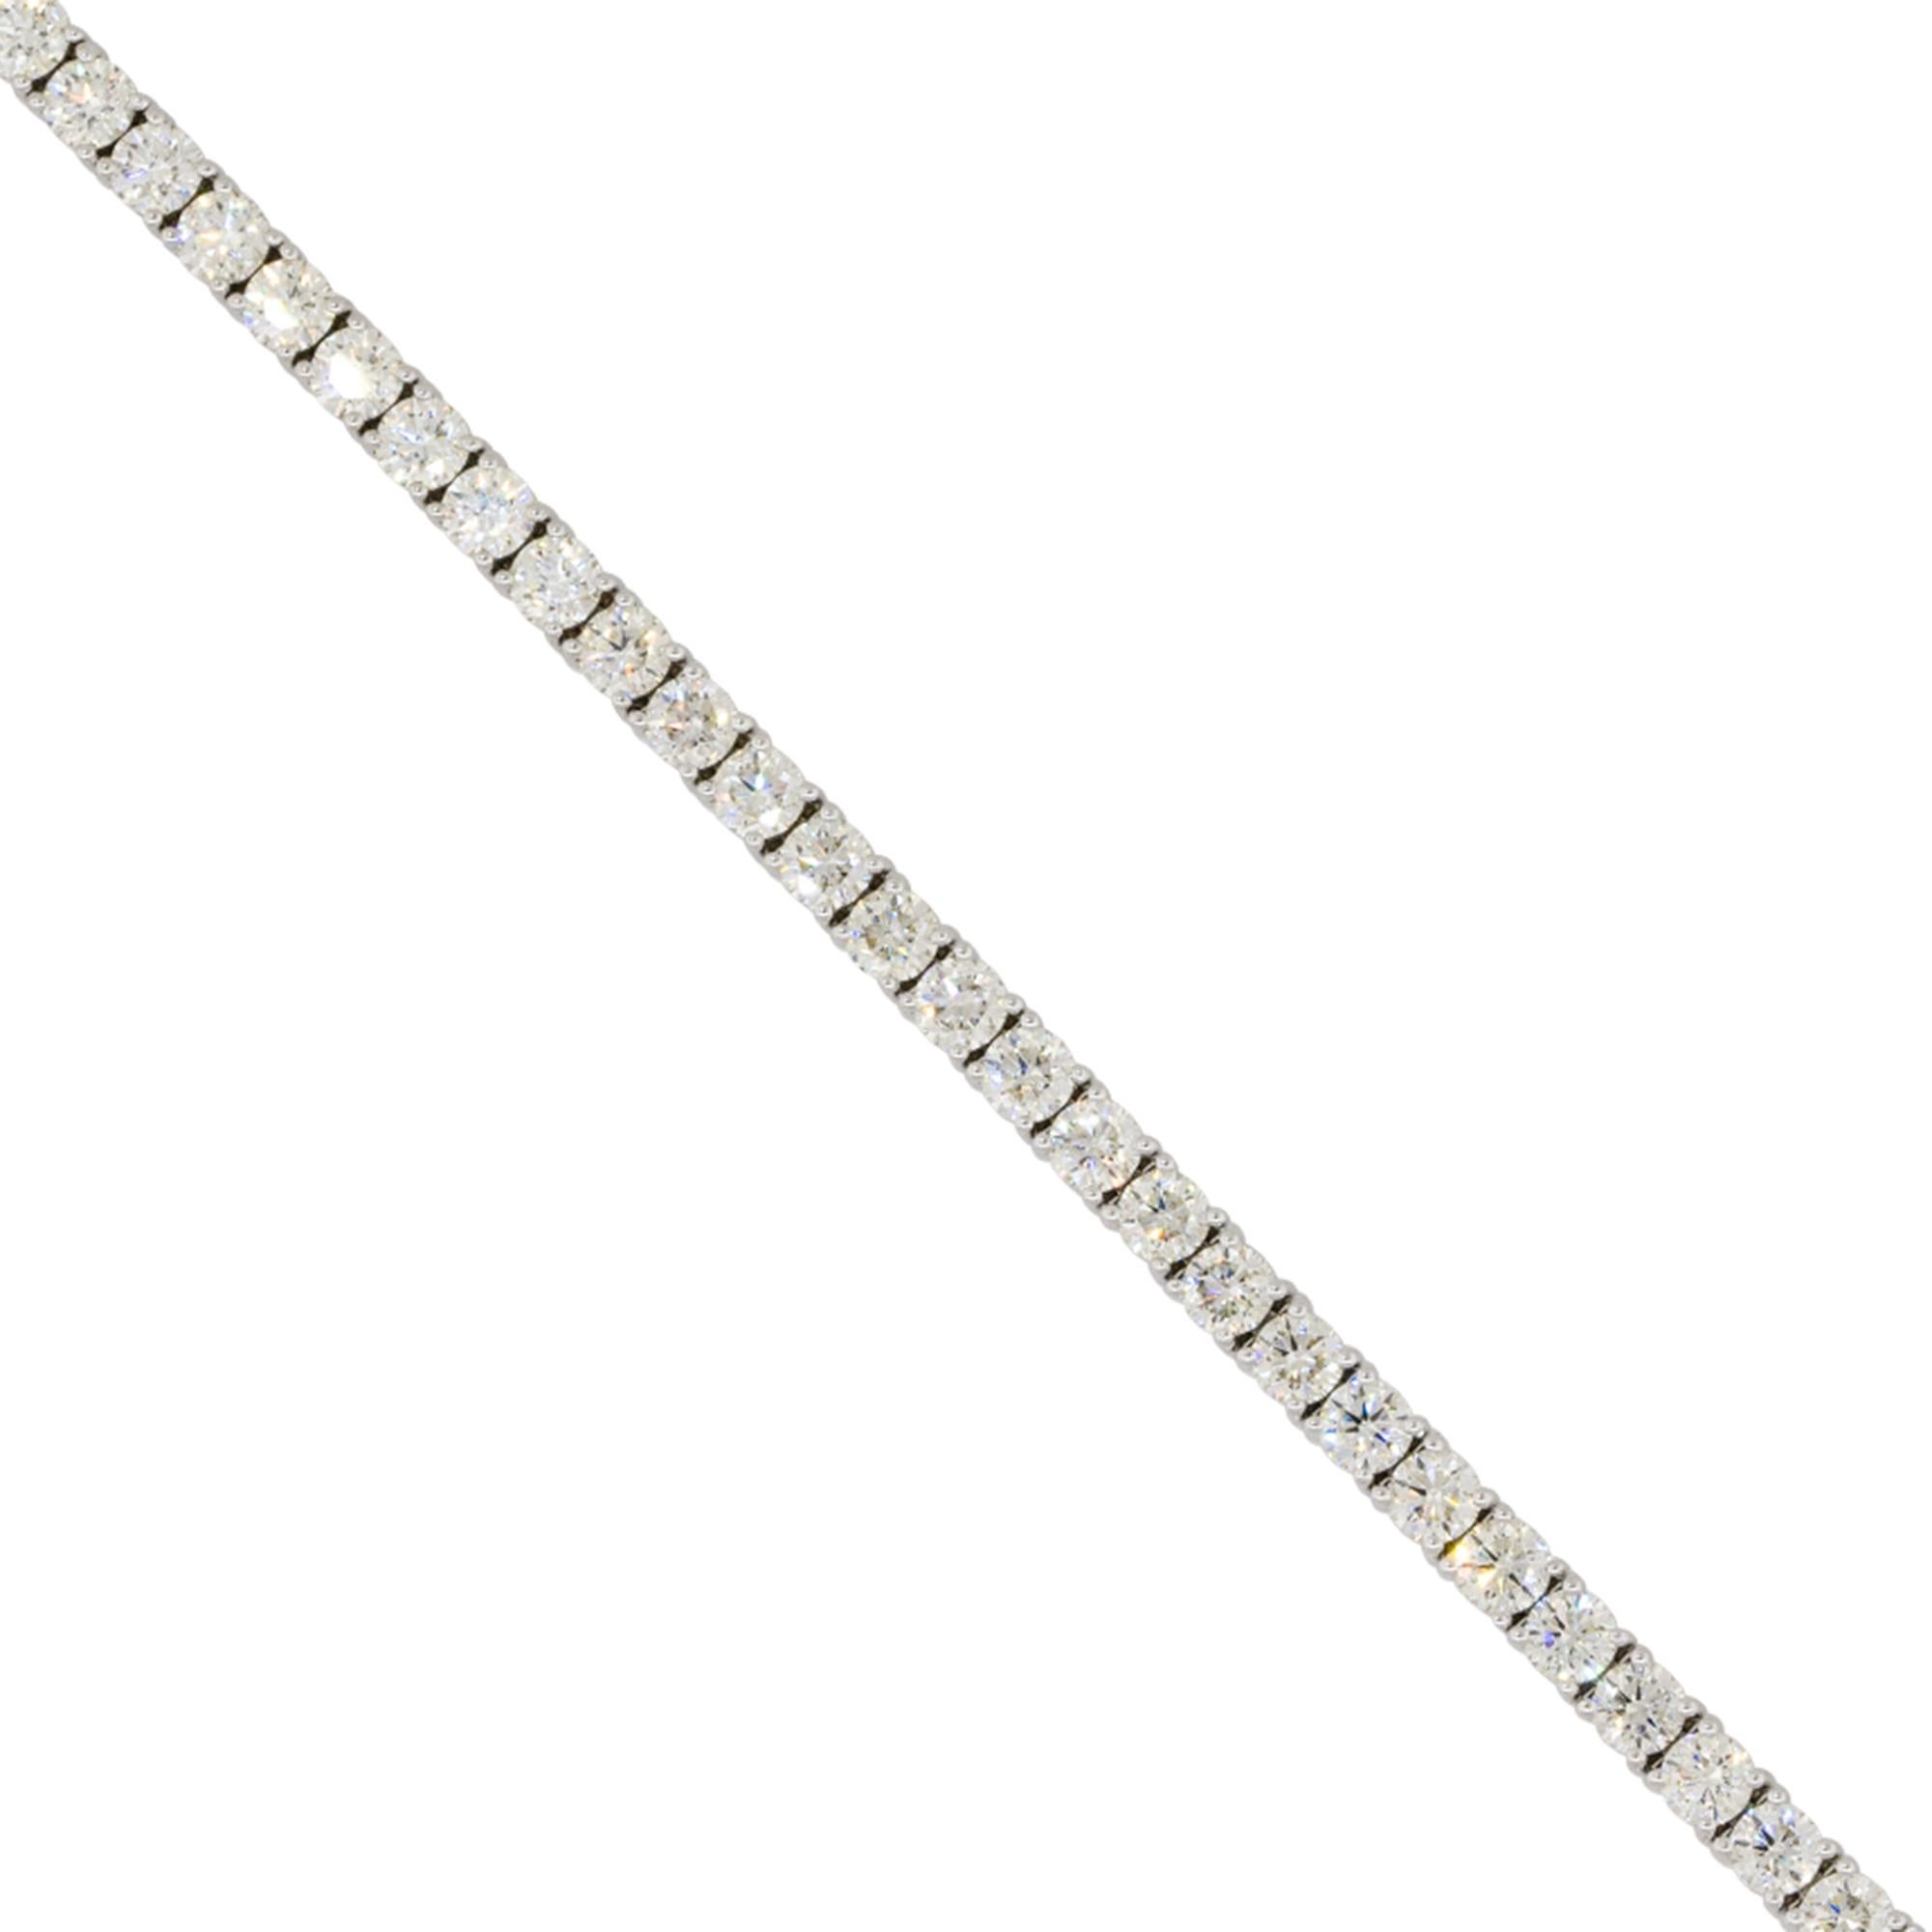 Material: 14k White Gold
Diamond Details: Approx. 6.38ctw of round brilliant Diamonds. Diamonds are G/H in color and VS in clarity
Clasps: Tongue in box clasp with safety latch
Total Weight: 11.2g (7.2dwt)
Length: 7